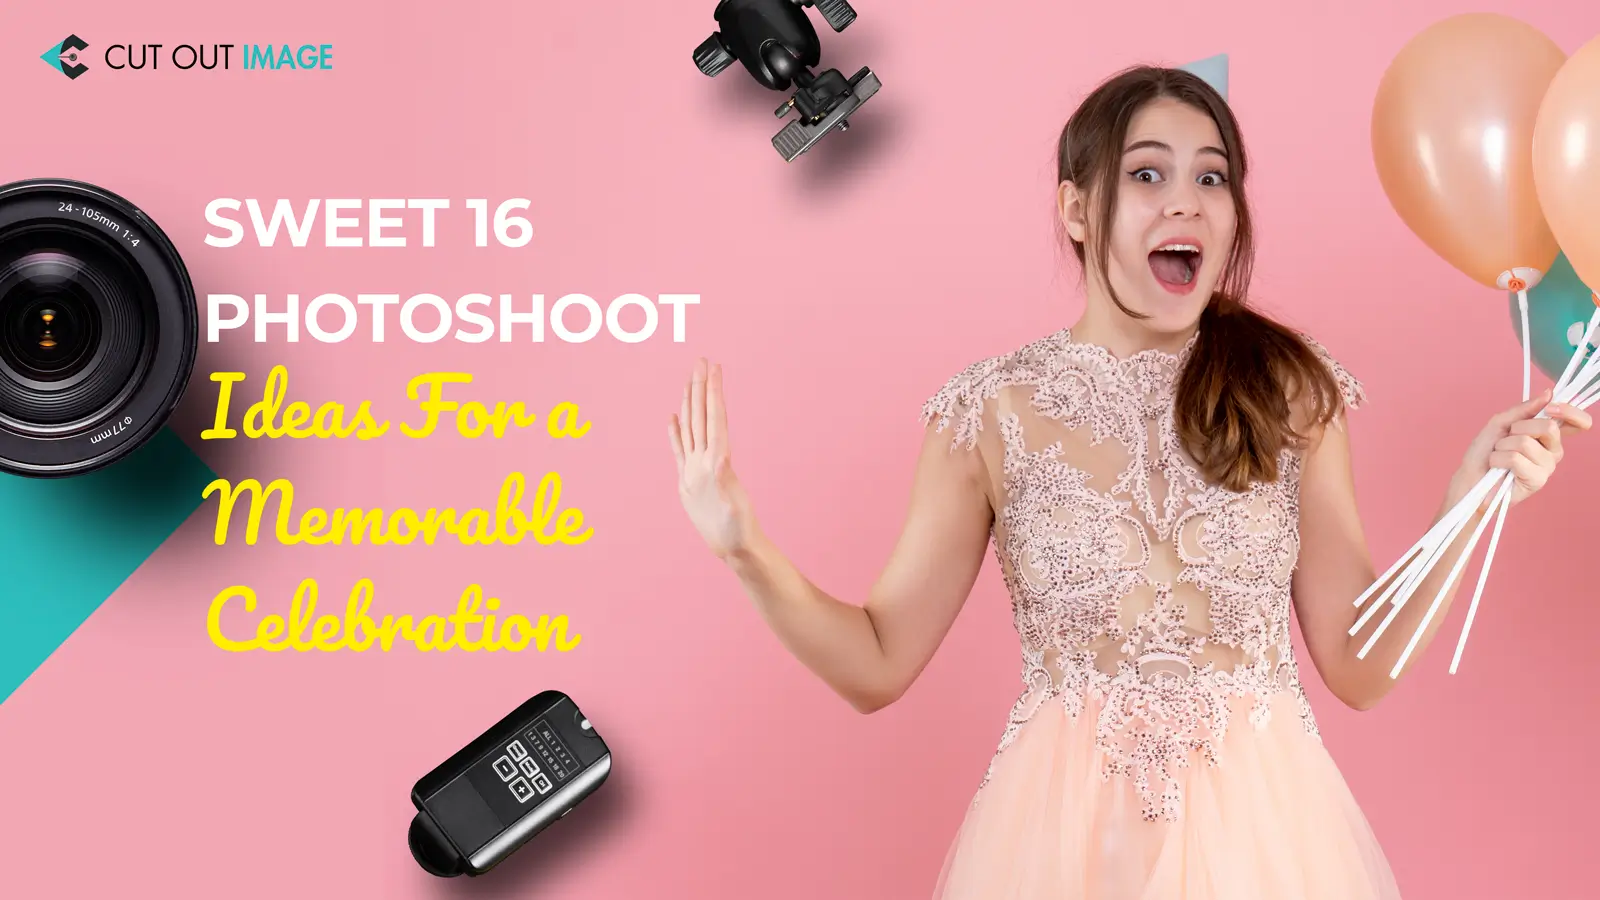 Sweet 16 Photoshoot Ideas For A Memorable Celebration